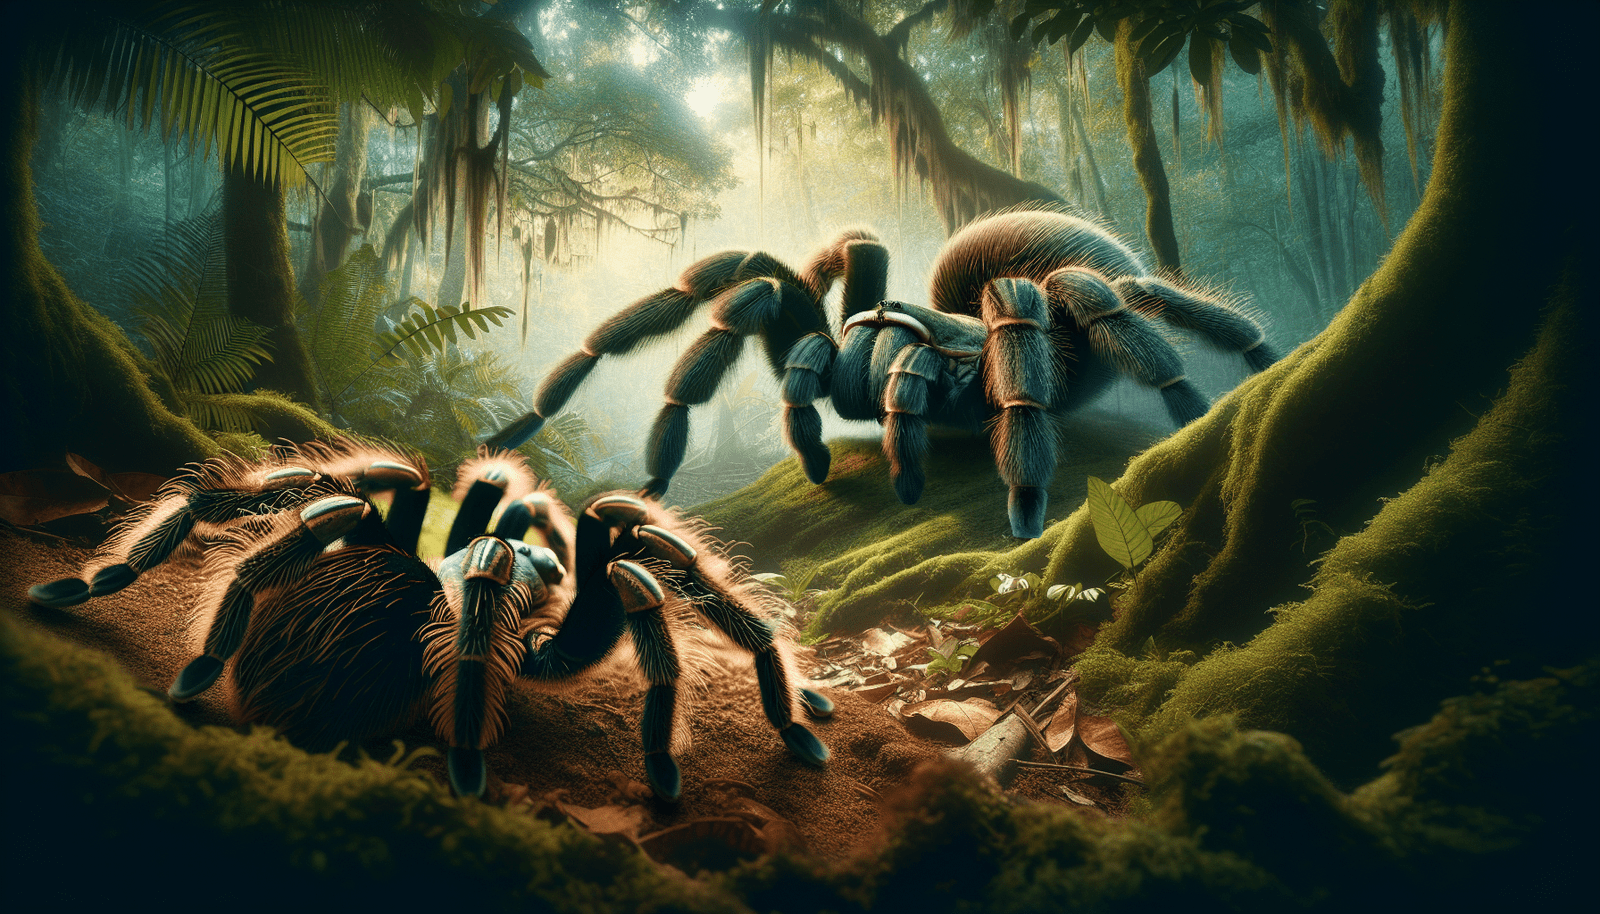 Can Tarantulas Be Threatened By Larger Predatory Spiders In Their Habitats?